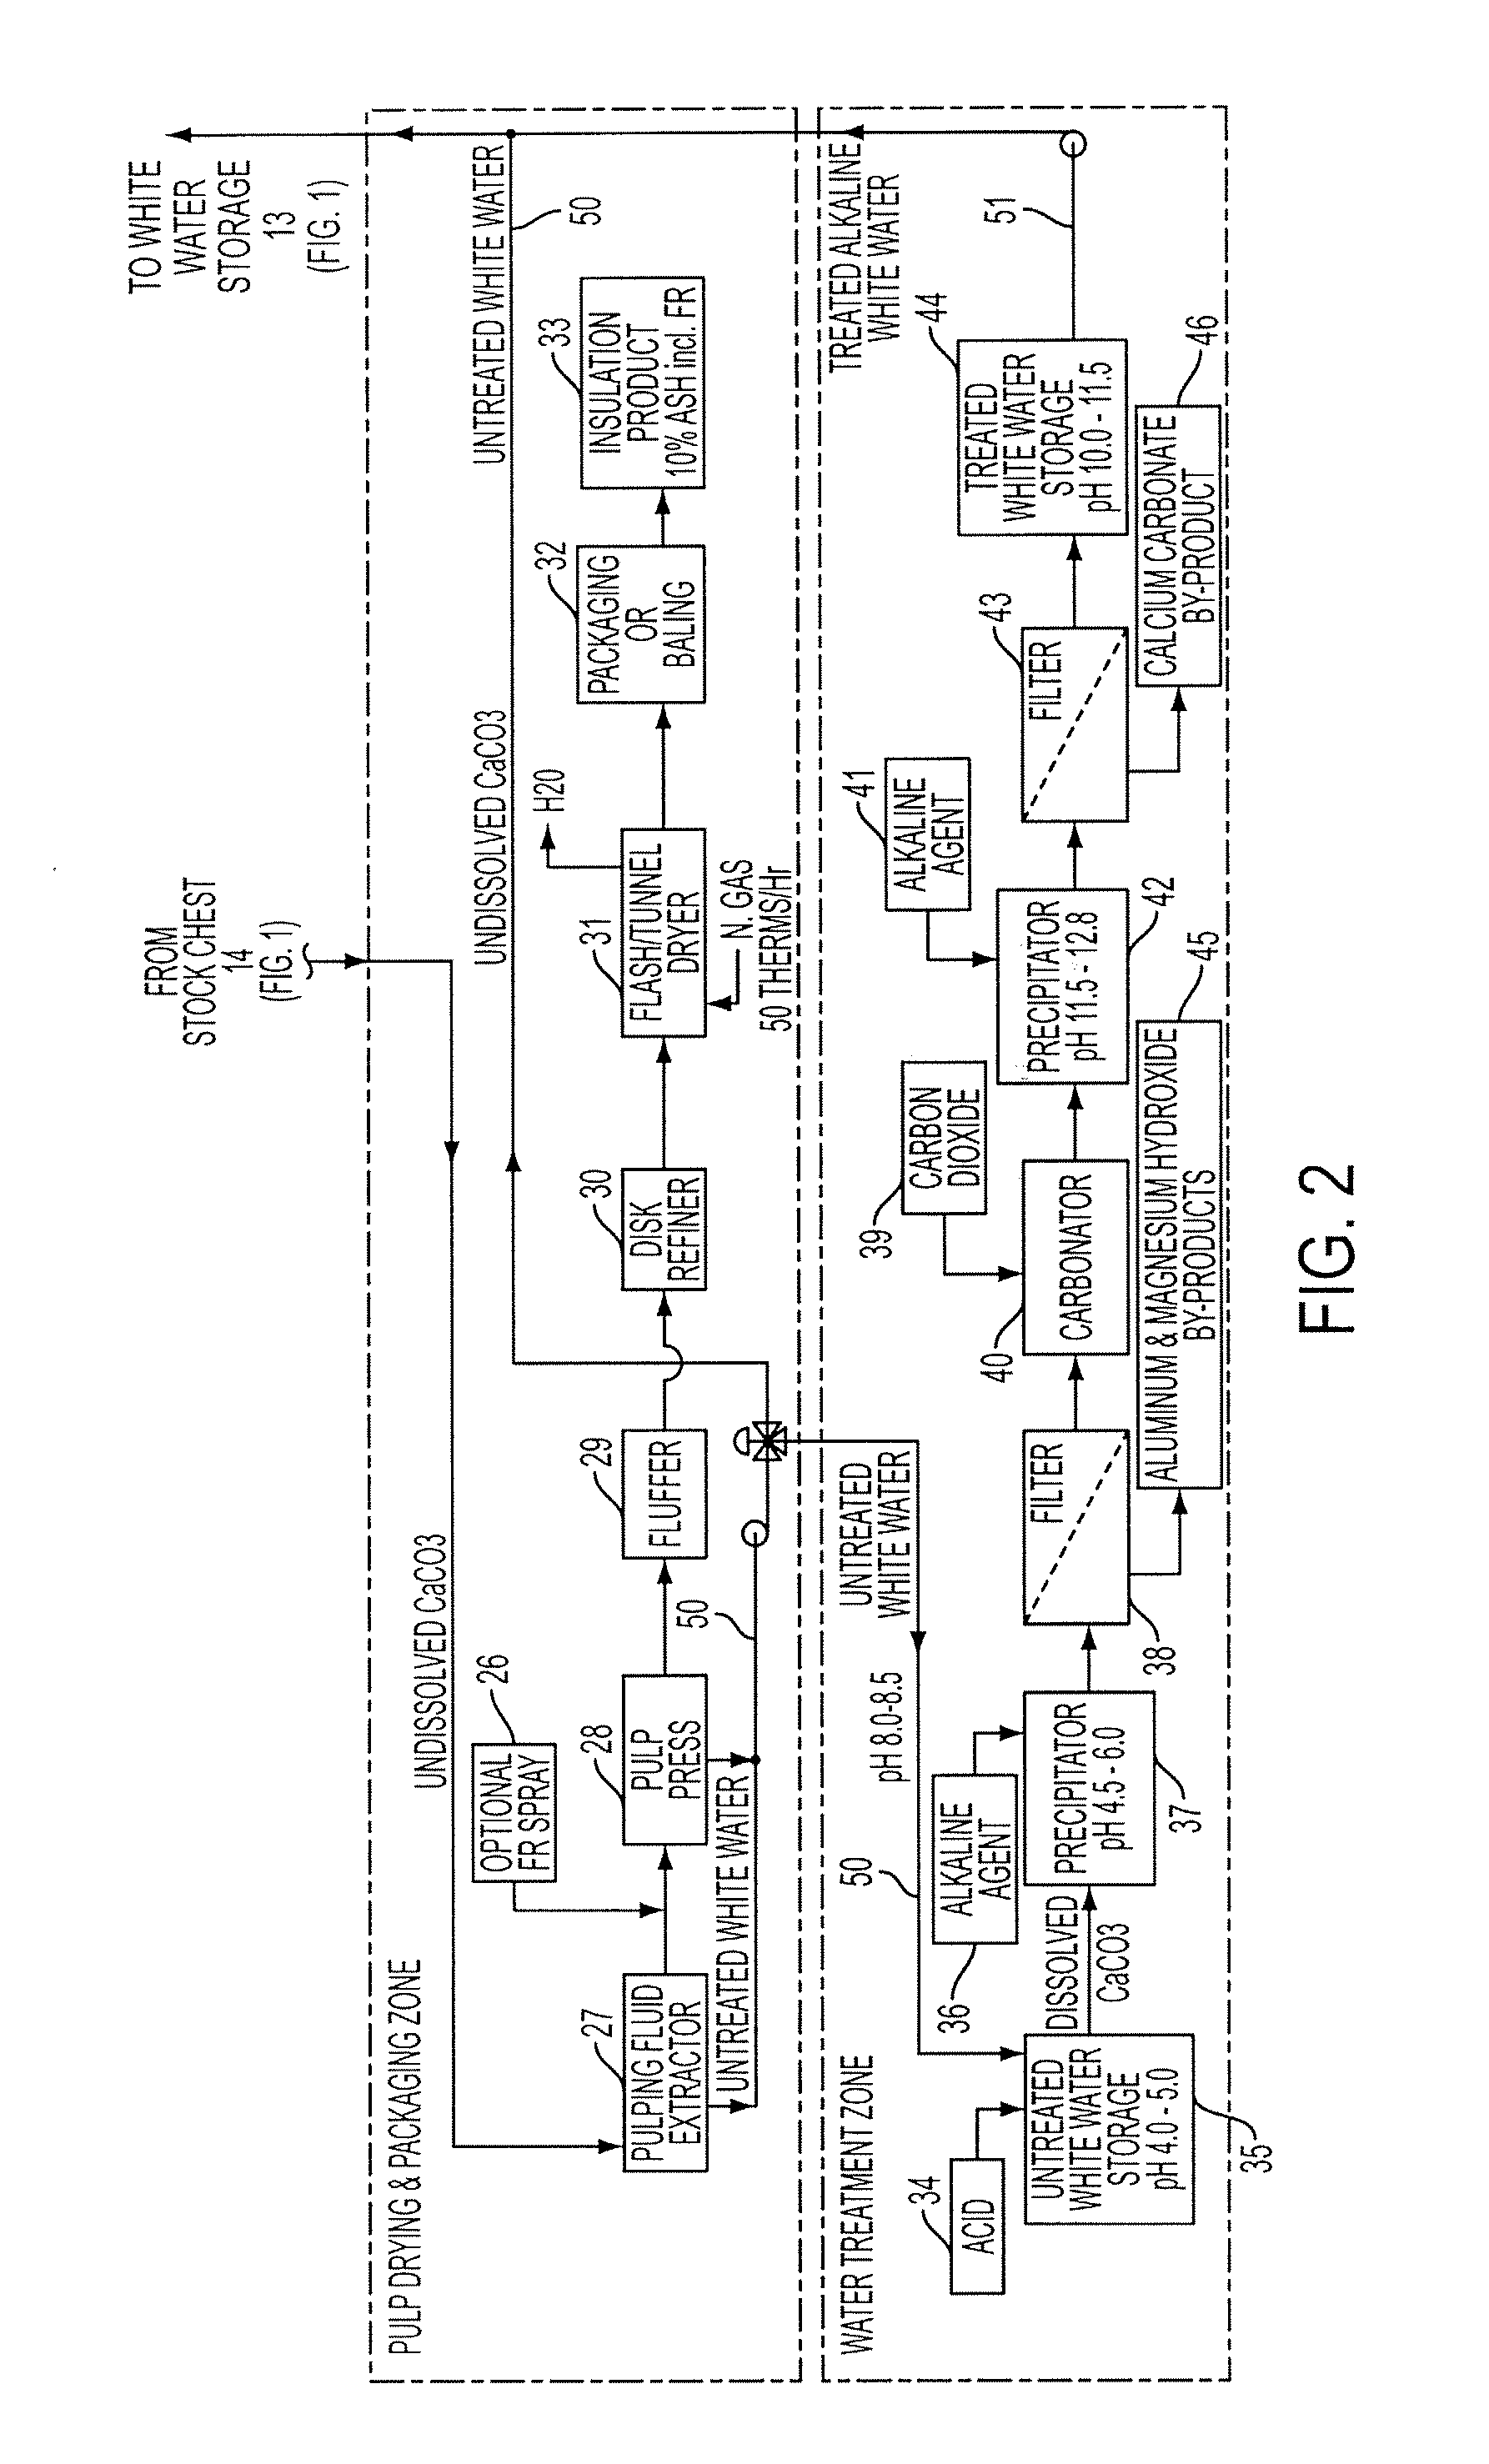 Wet Pulping System and Method for Producing Cellulosic Insulation with Low Ash Content